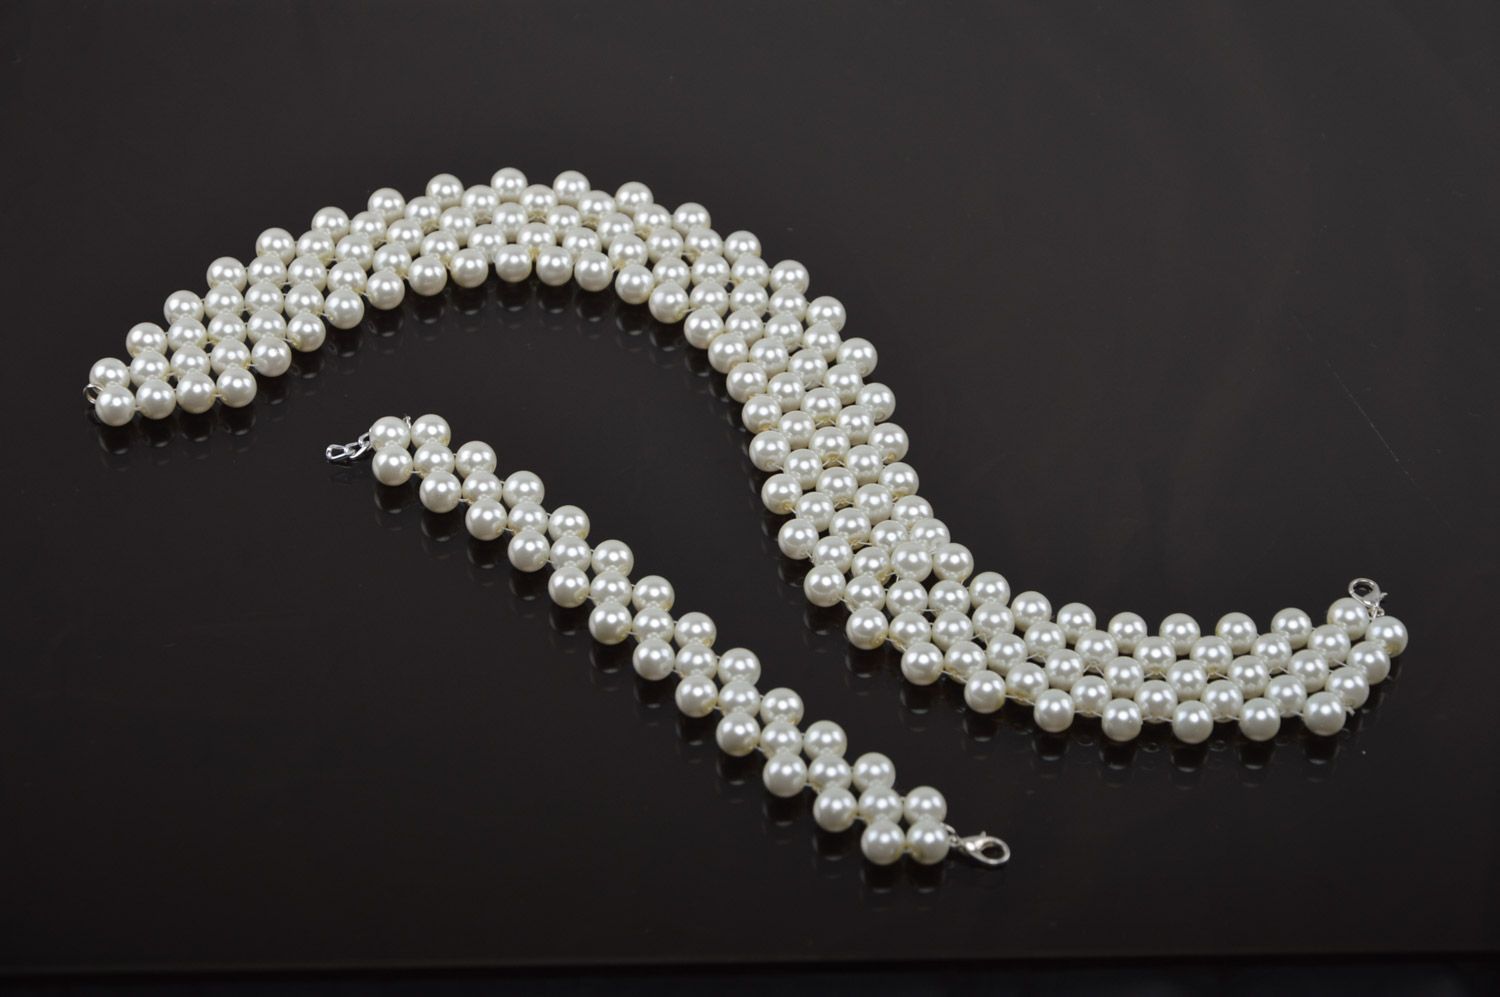 Handmade artificial pearl jewelry set two items wide necklace and bangle bracelet photo 3